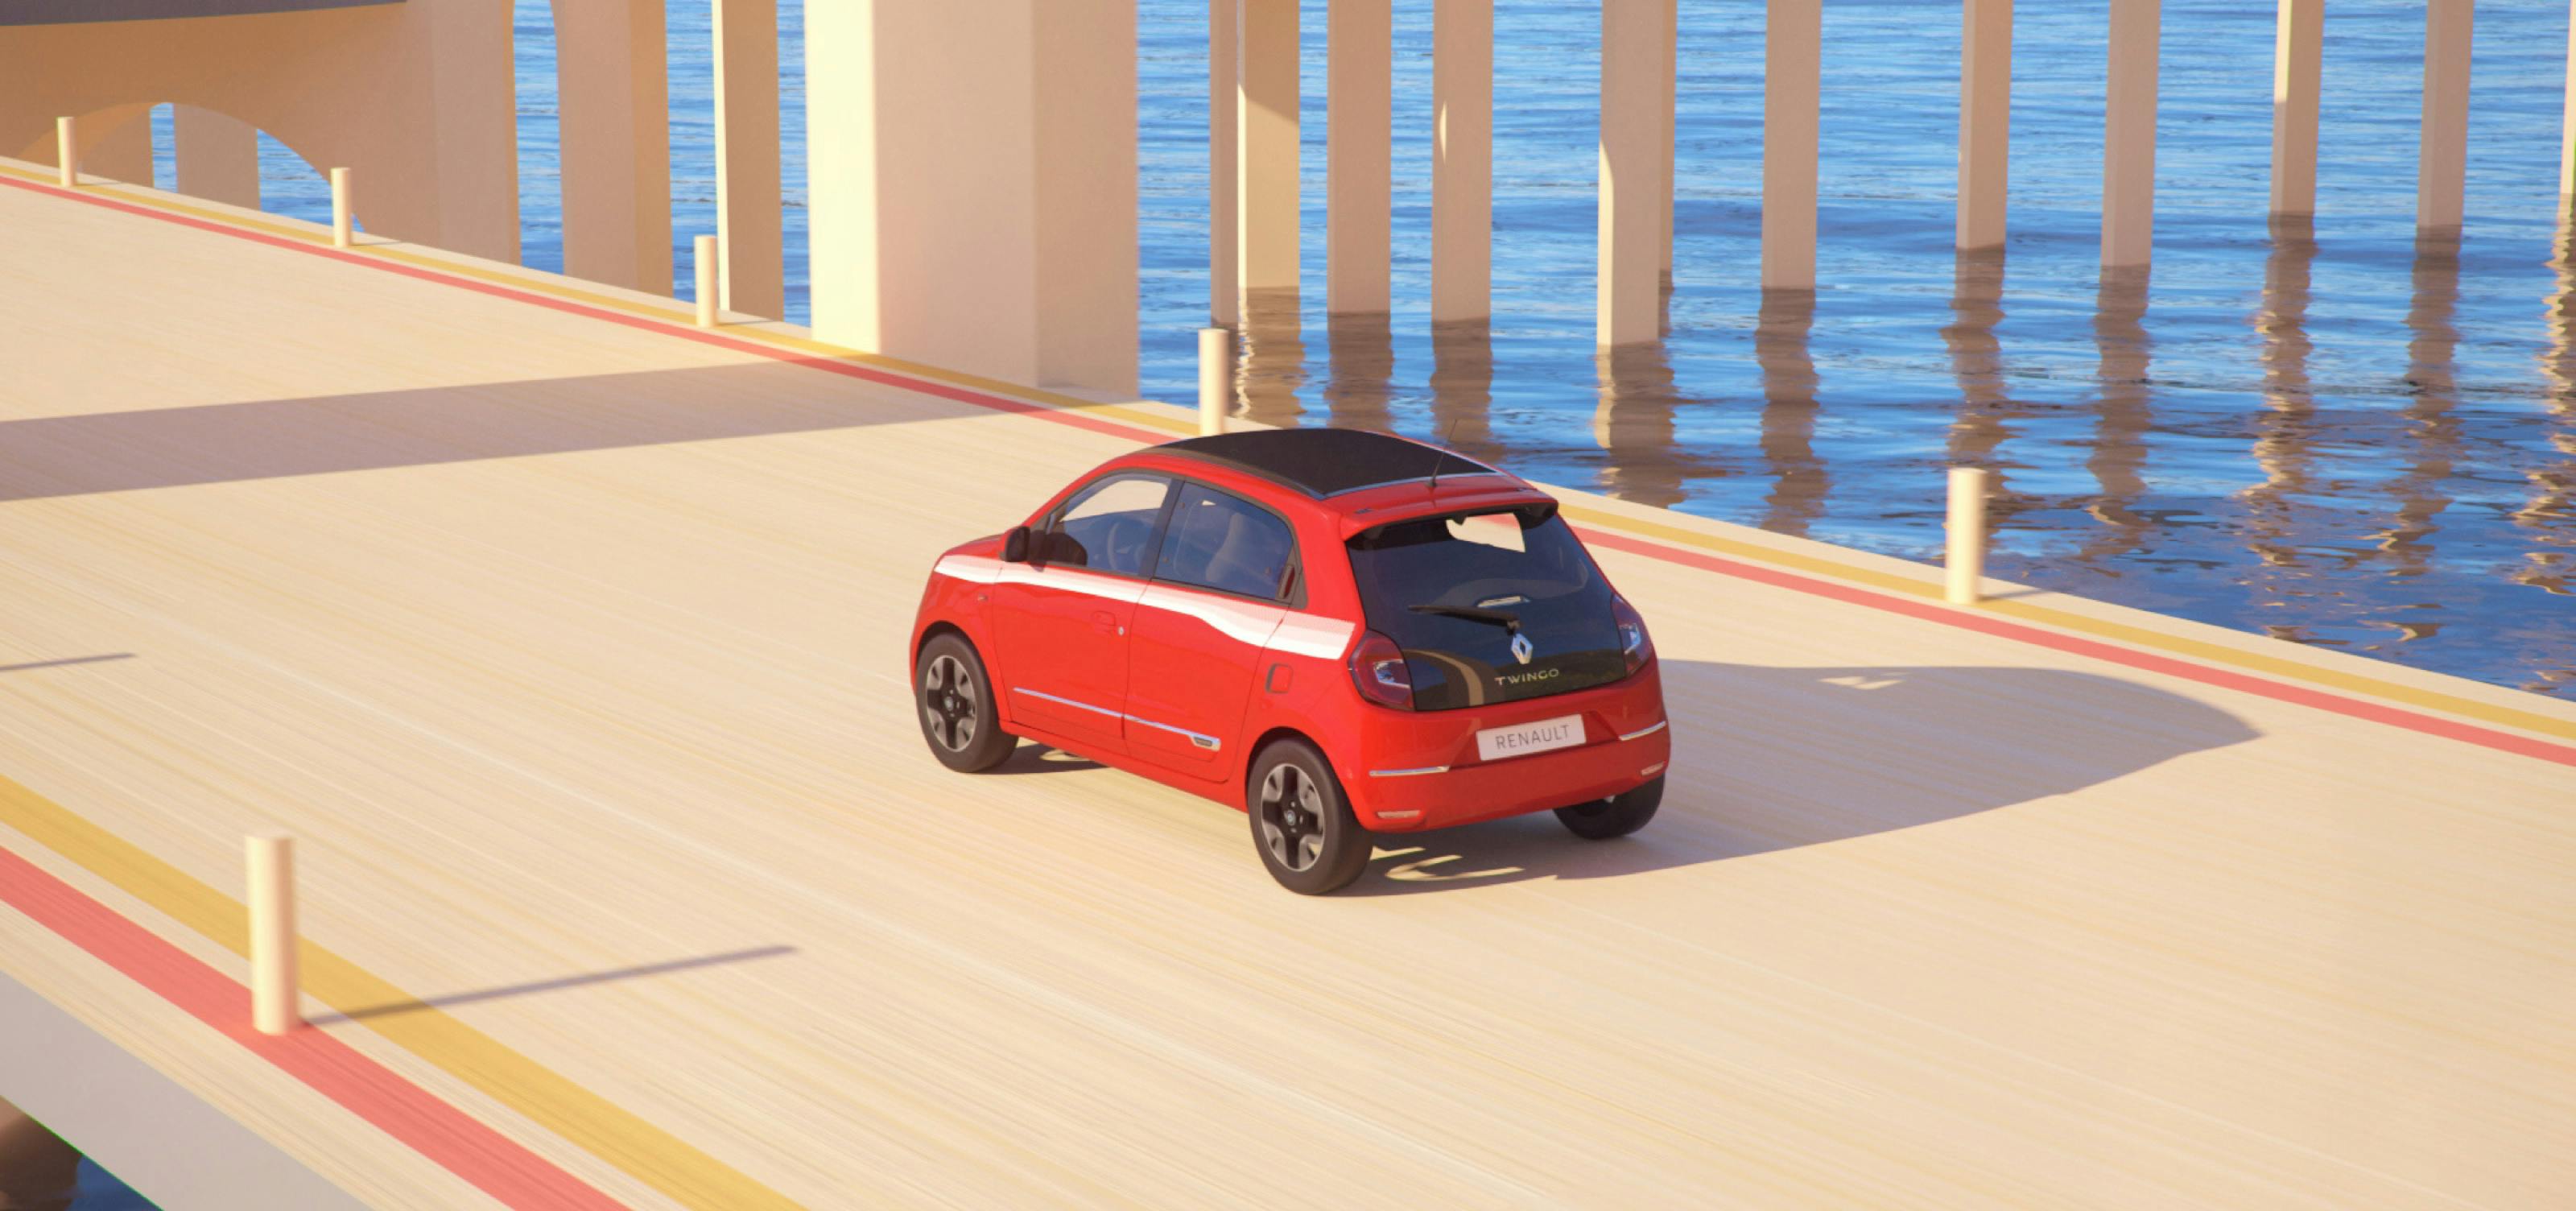 A red Renault Twingo model on the road.